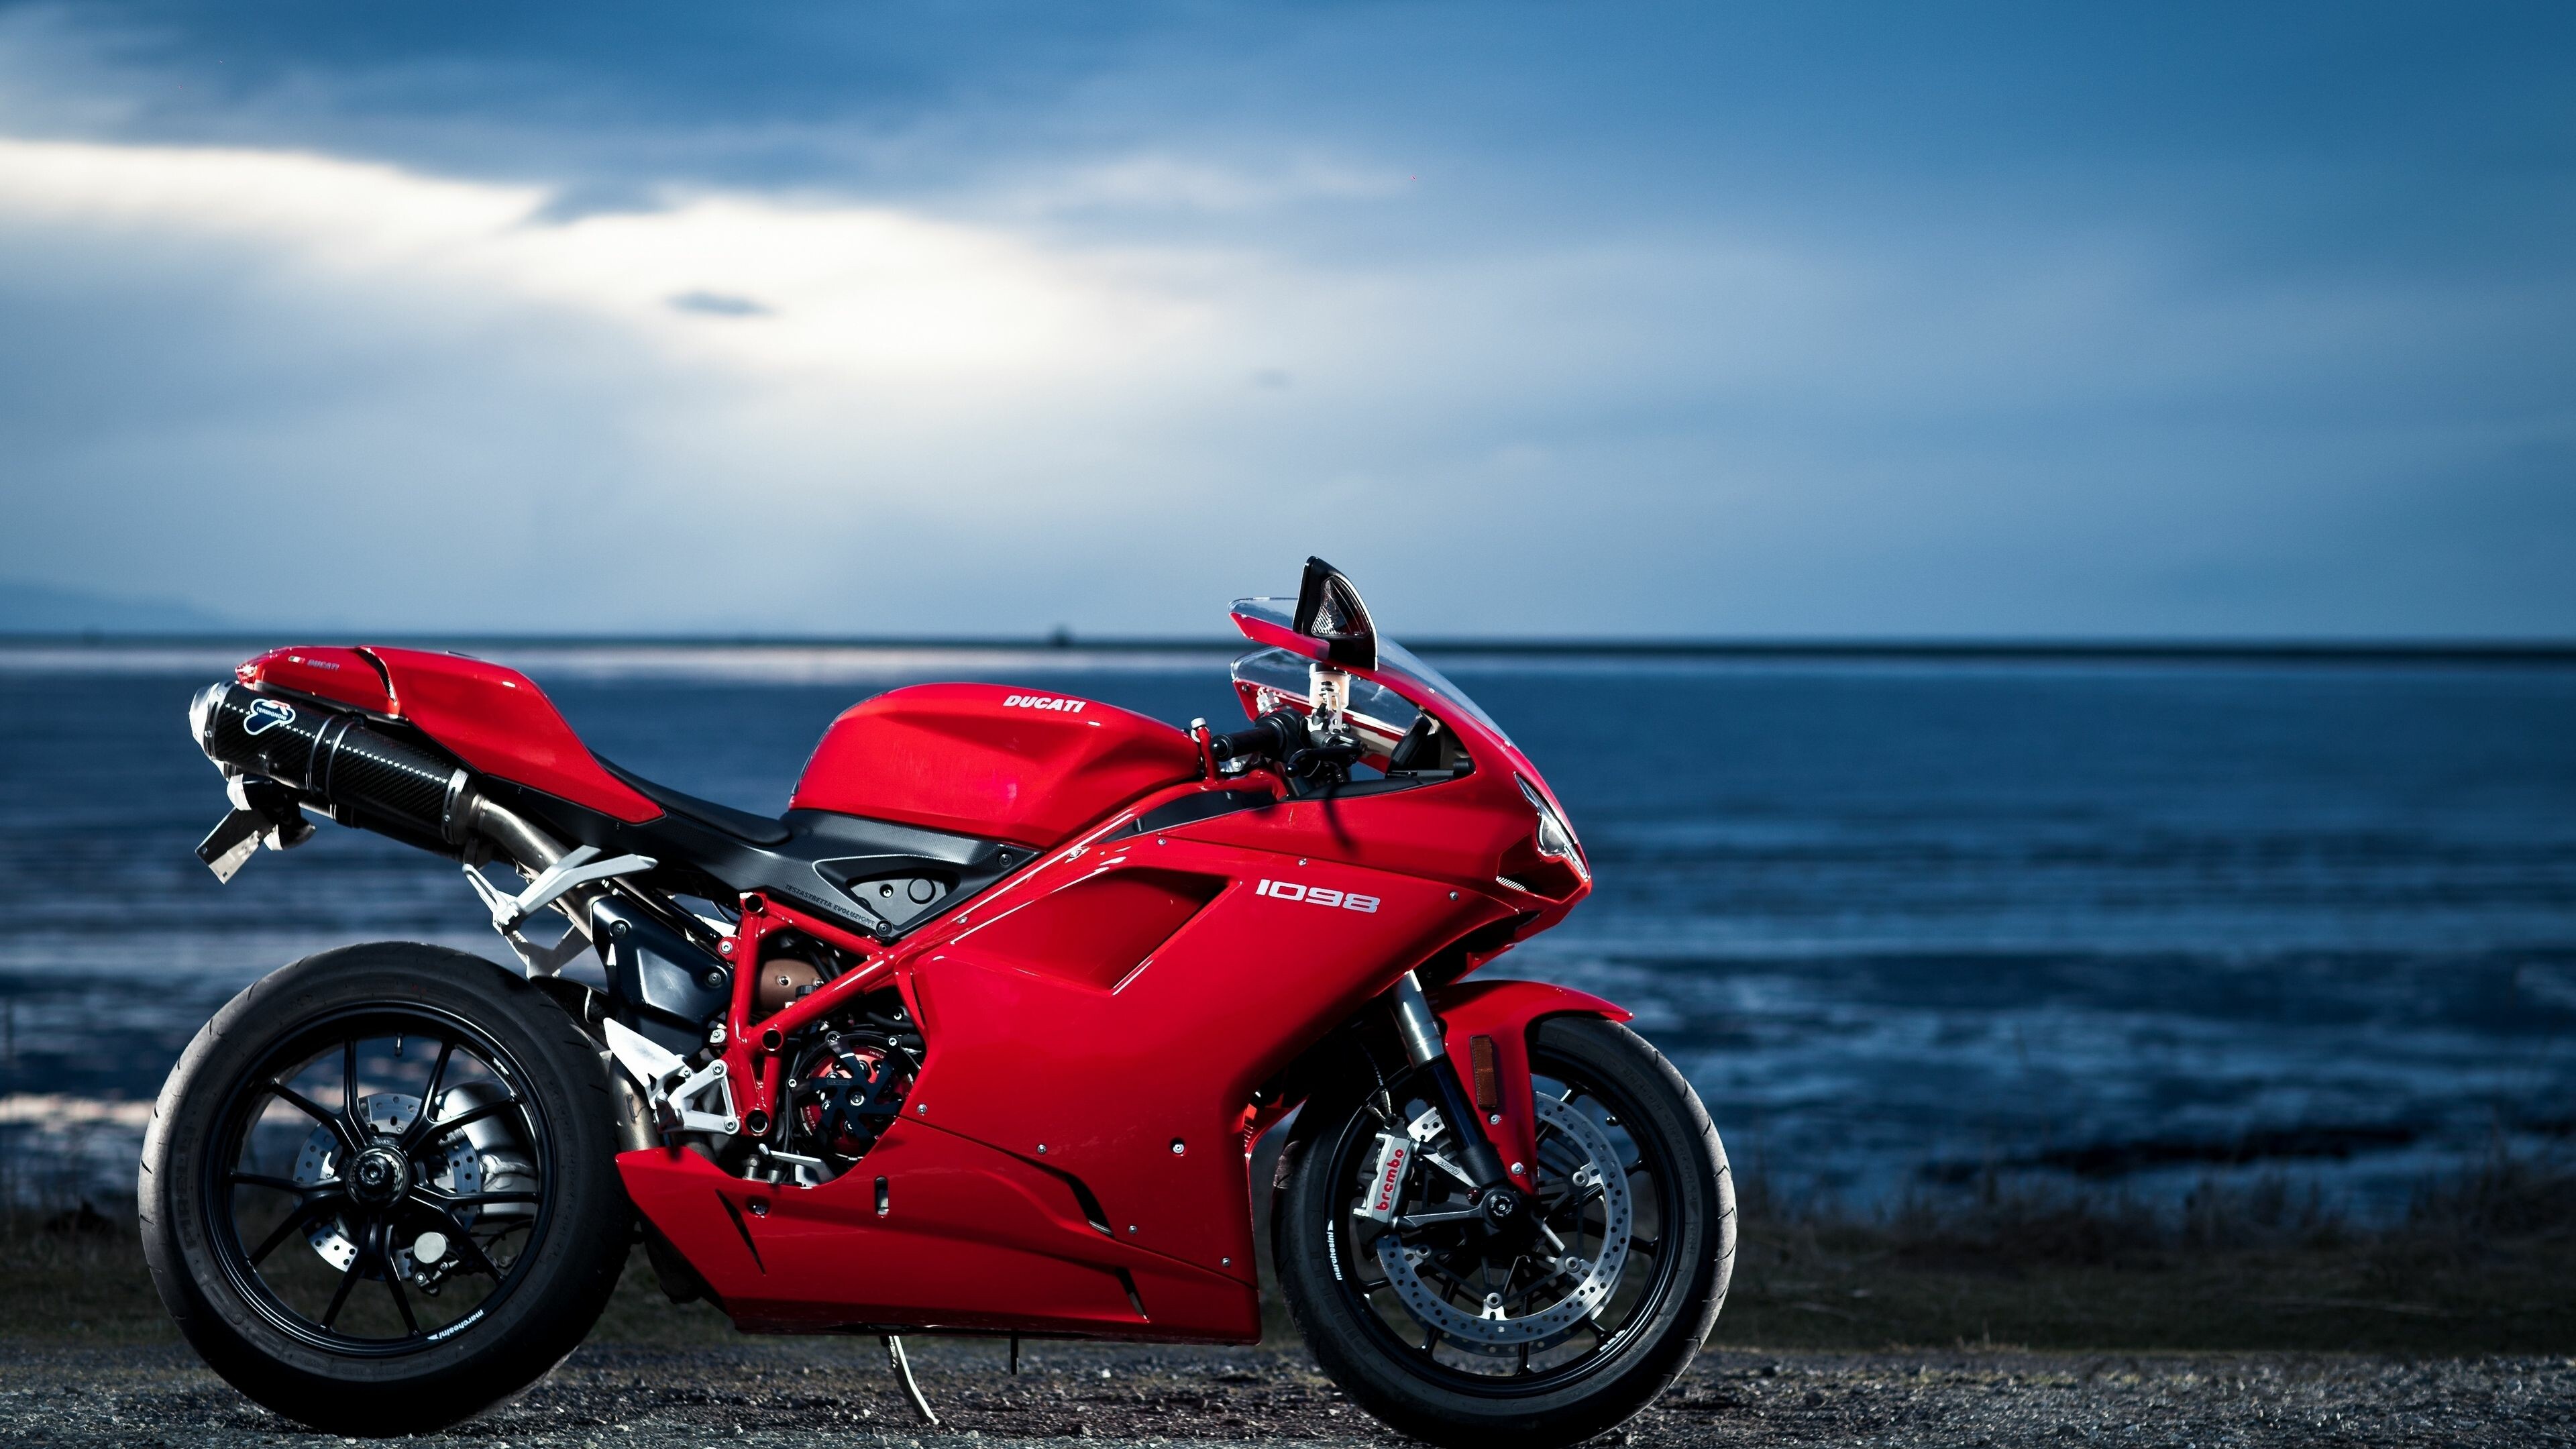 Ducati: The motorcycle-manufacturing division of Italian company. 3840x2160 4K Wallpaper.